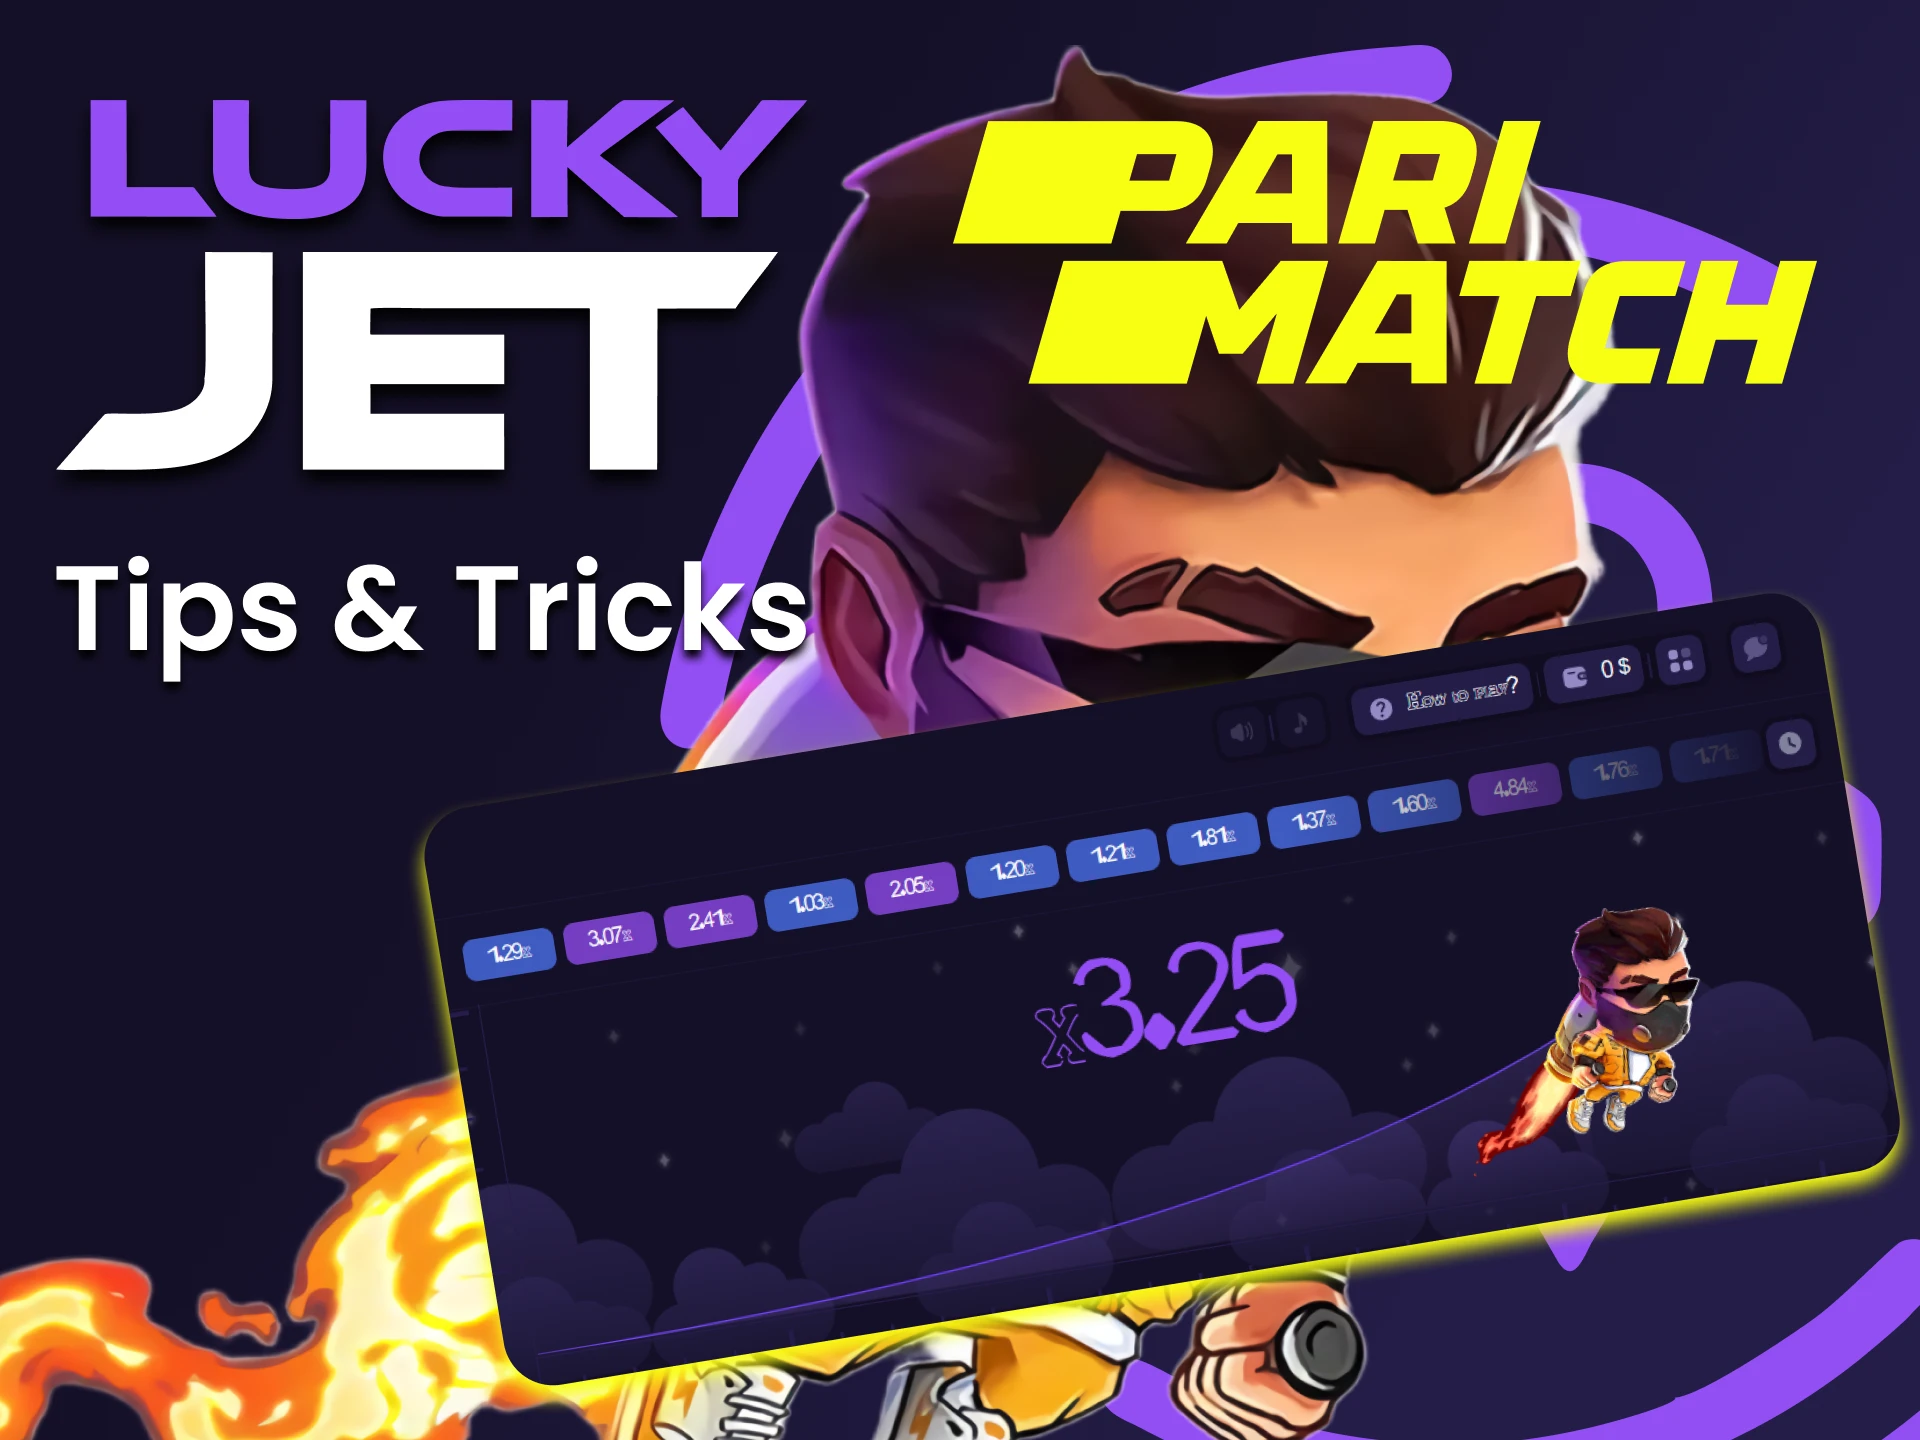 Learn the possible tactics of playing Lucky Jet from Parimatch players.